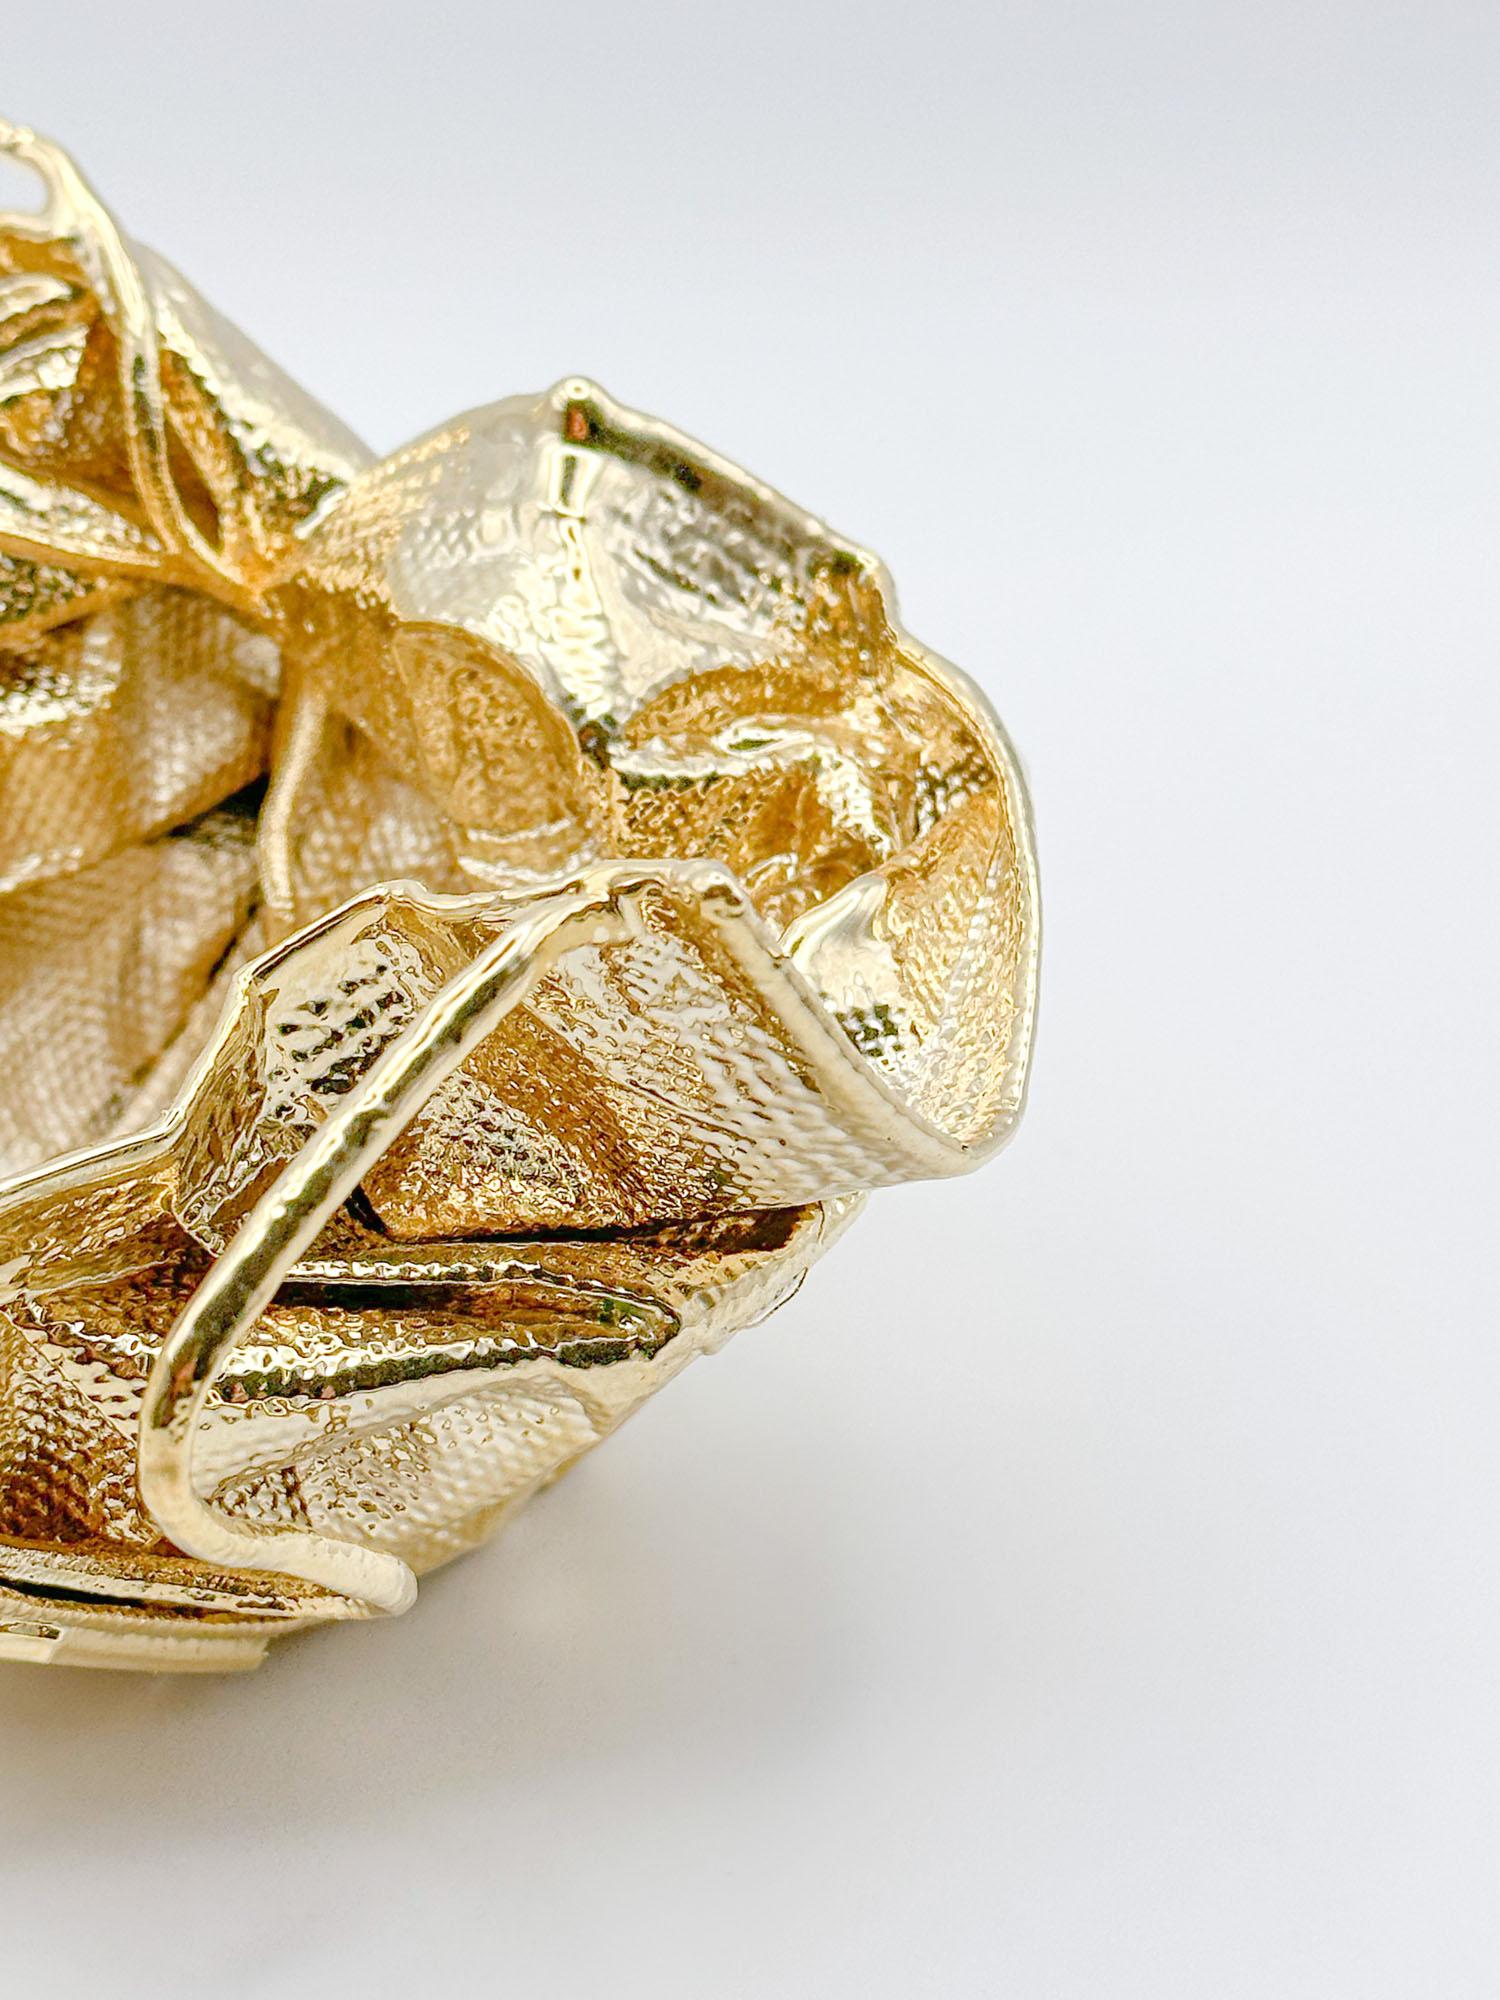 Contemporary Remask Act 009 Gold Art Object Made from Surgical Mask by Enrico Girotti For Sale